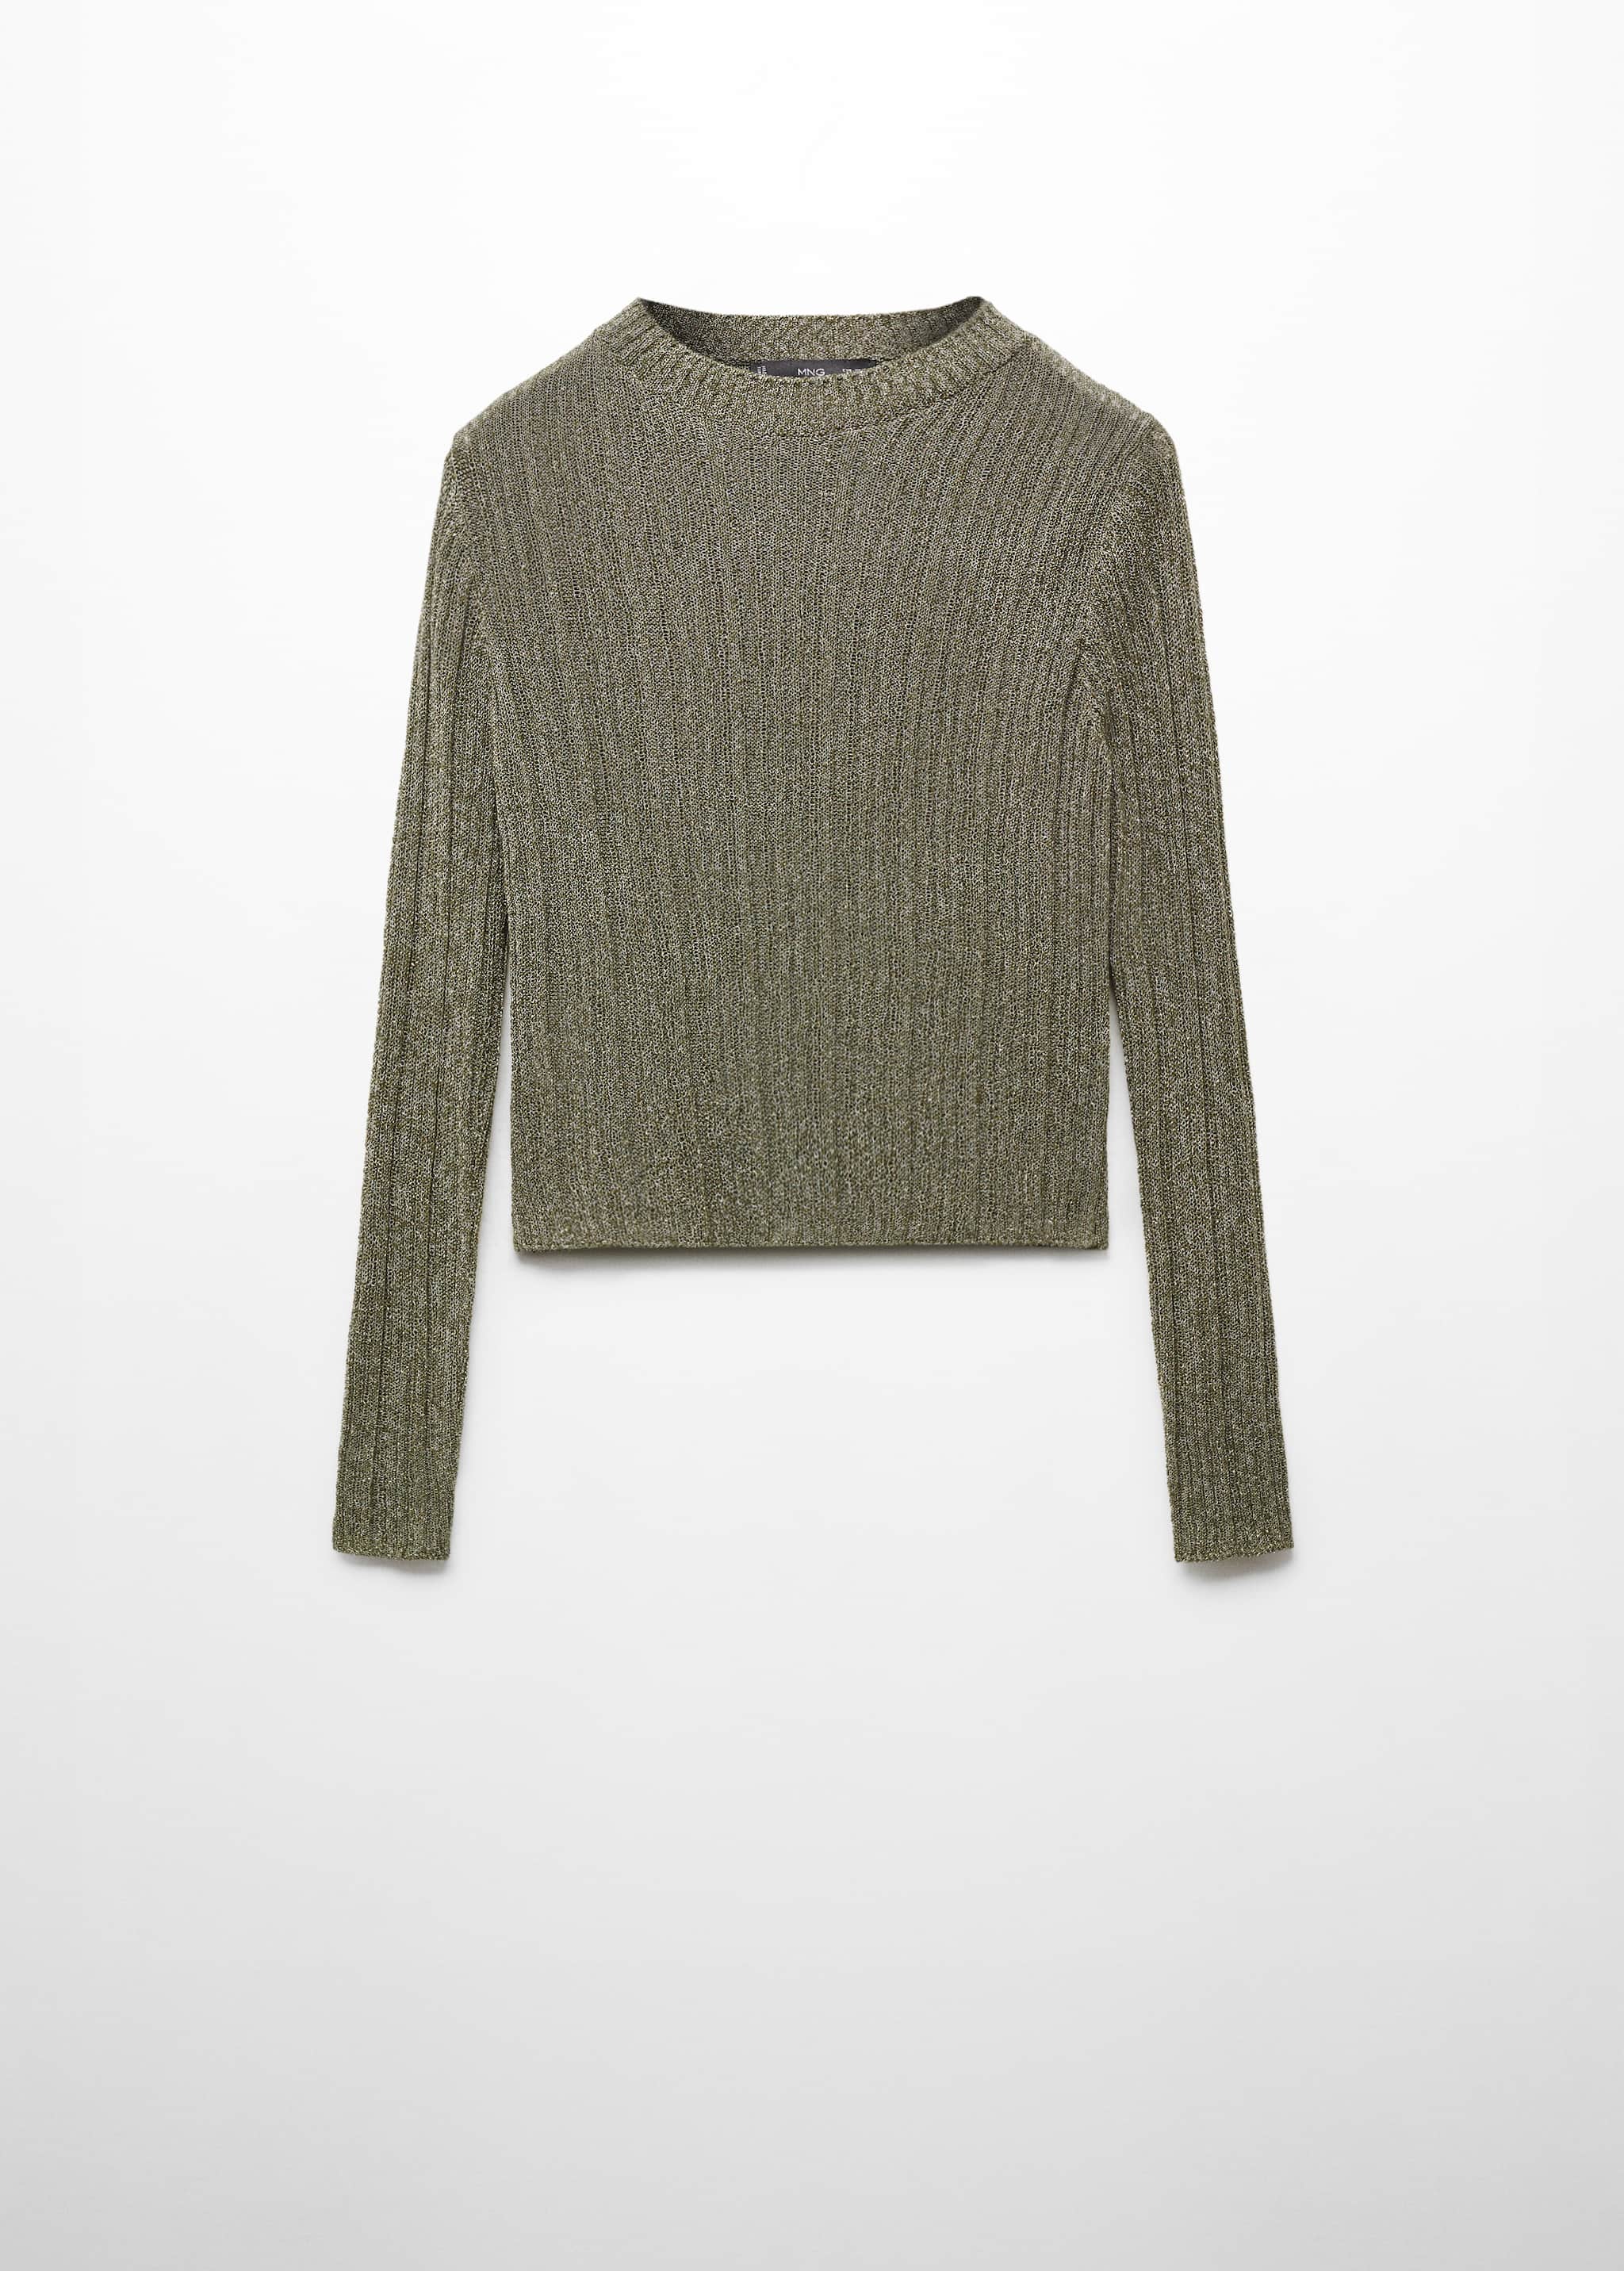 Lurex perkins-neck sweater - Article without model